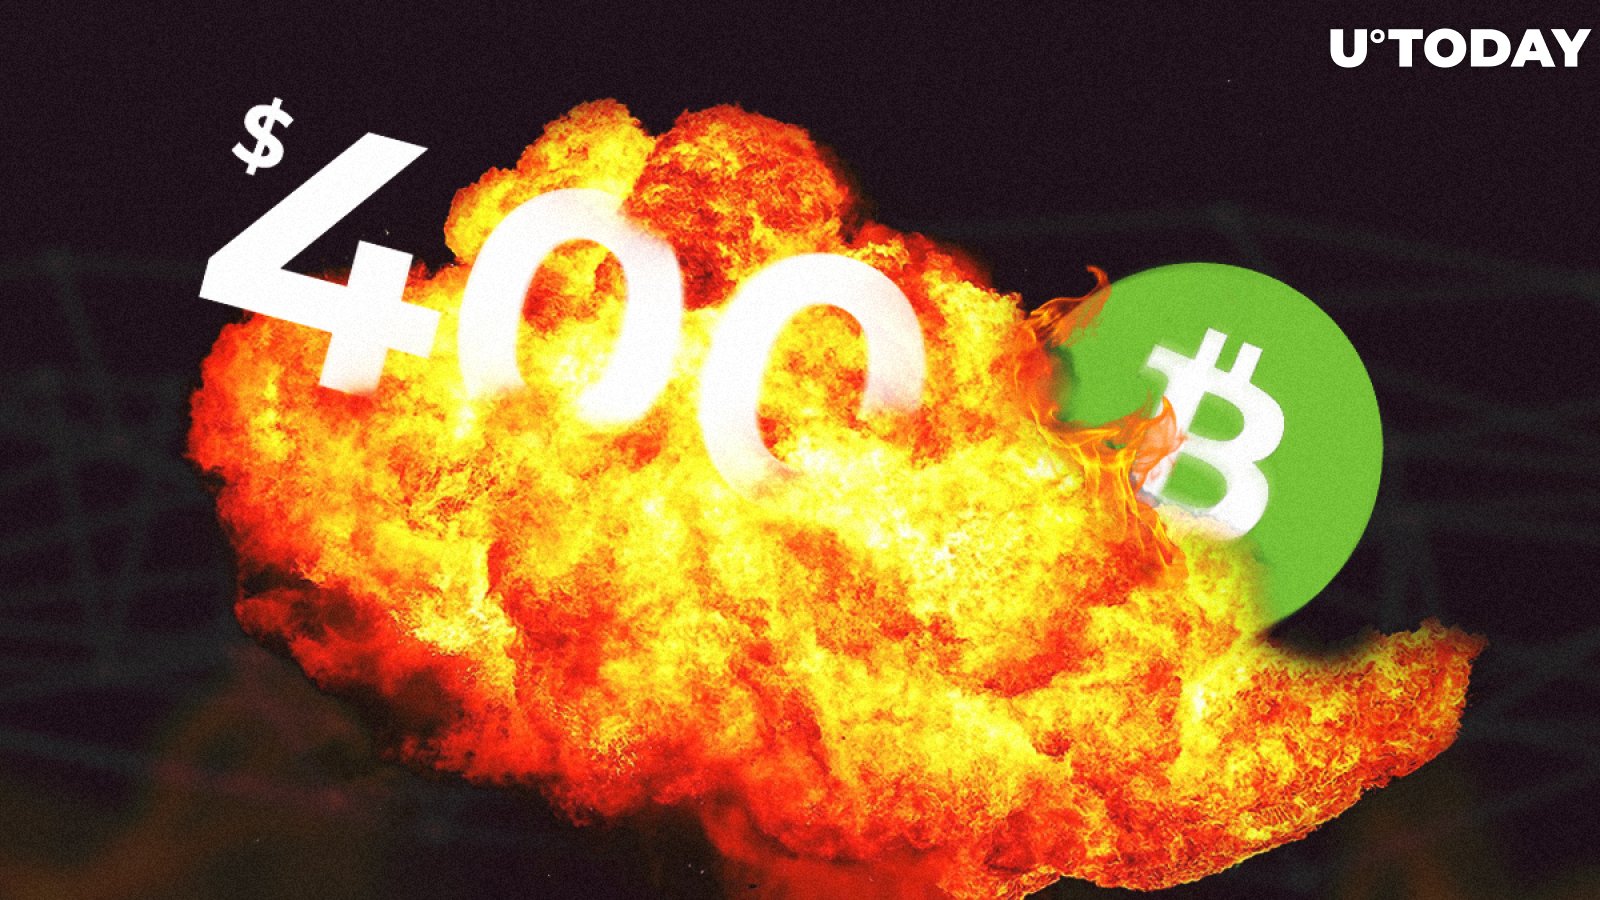 Bitcoin Cash Price Prediction: Will BCH Cost $400 by Next Week? BCH Is to Break Resistance!